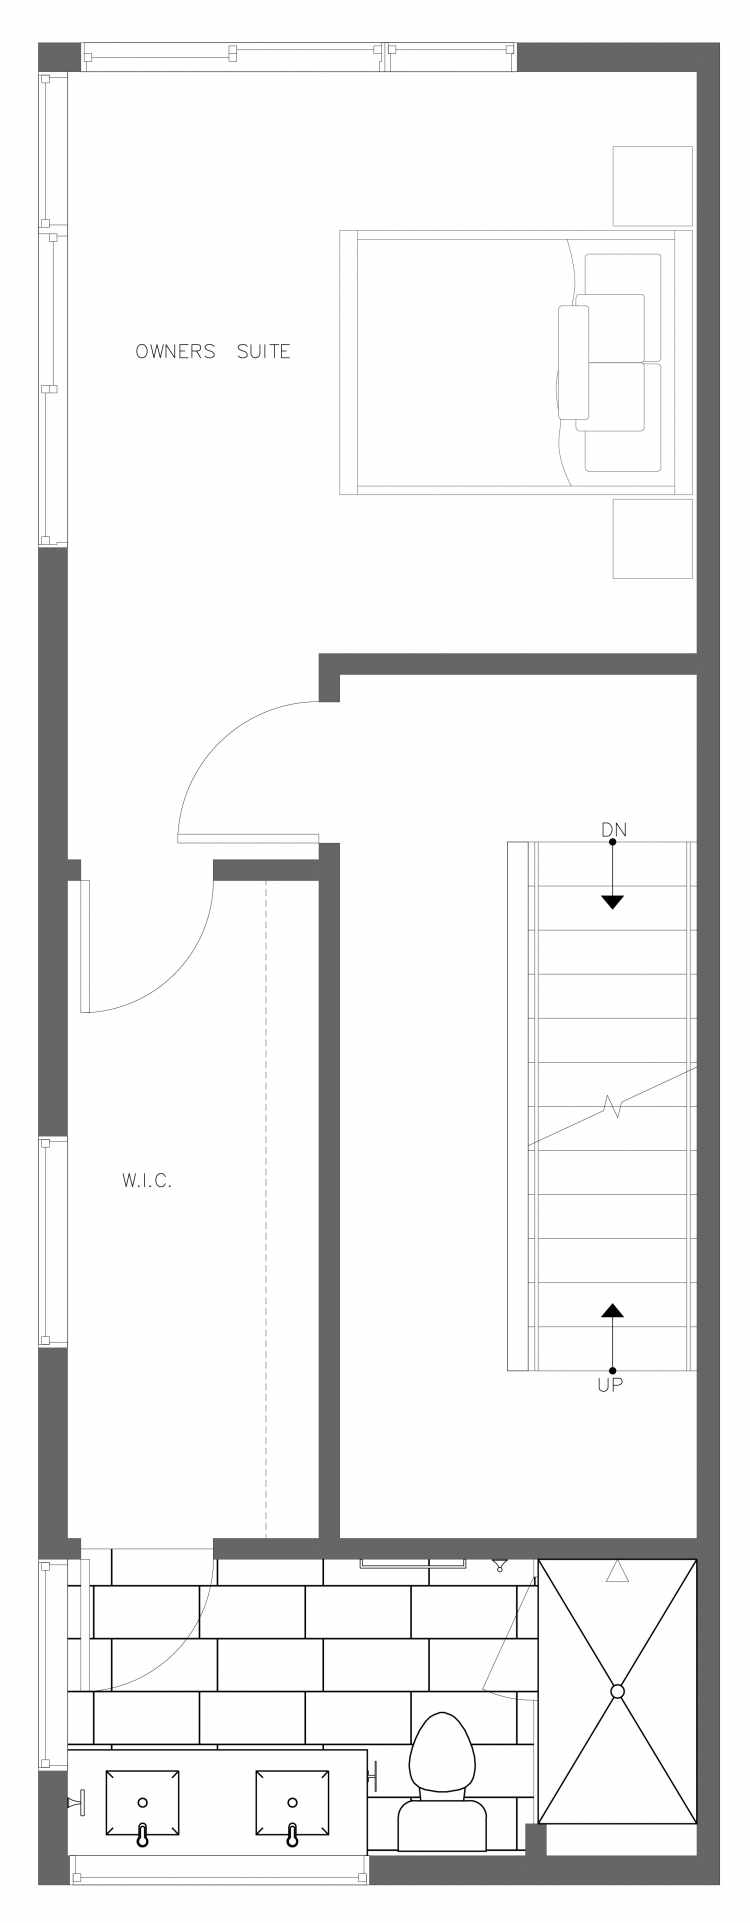 Third Floor Plan of 3406A 15th Ave W, One of the Arlo Townhomes in North Queen Anne